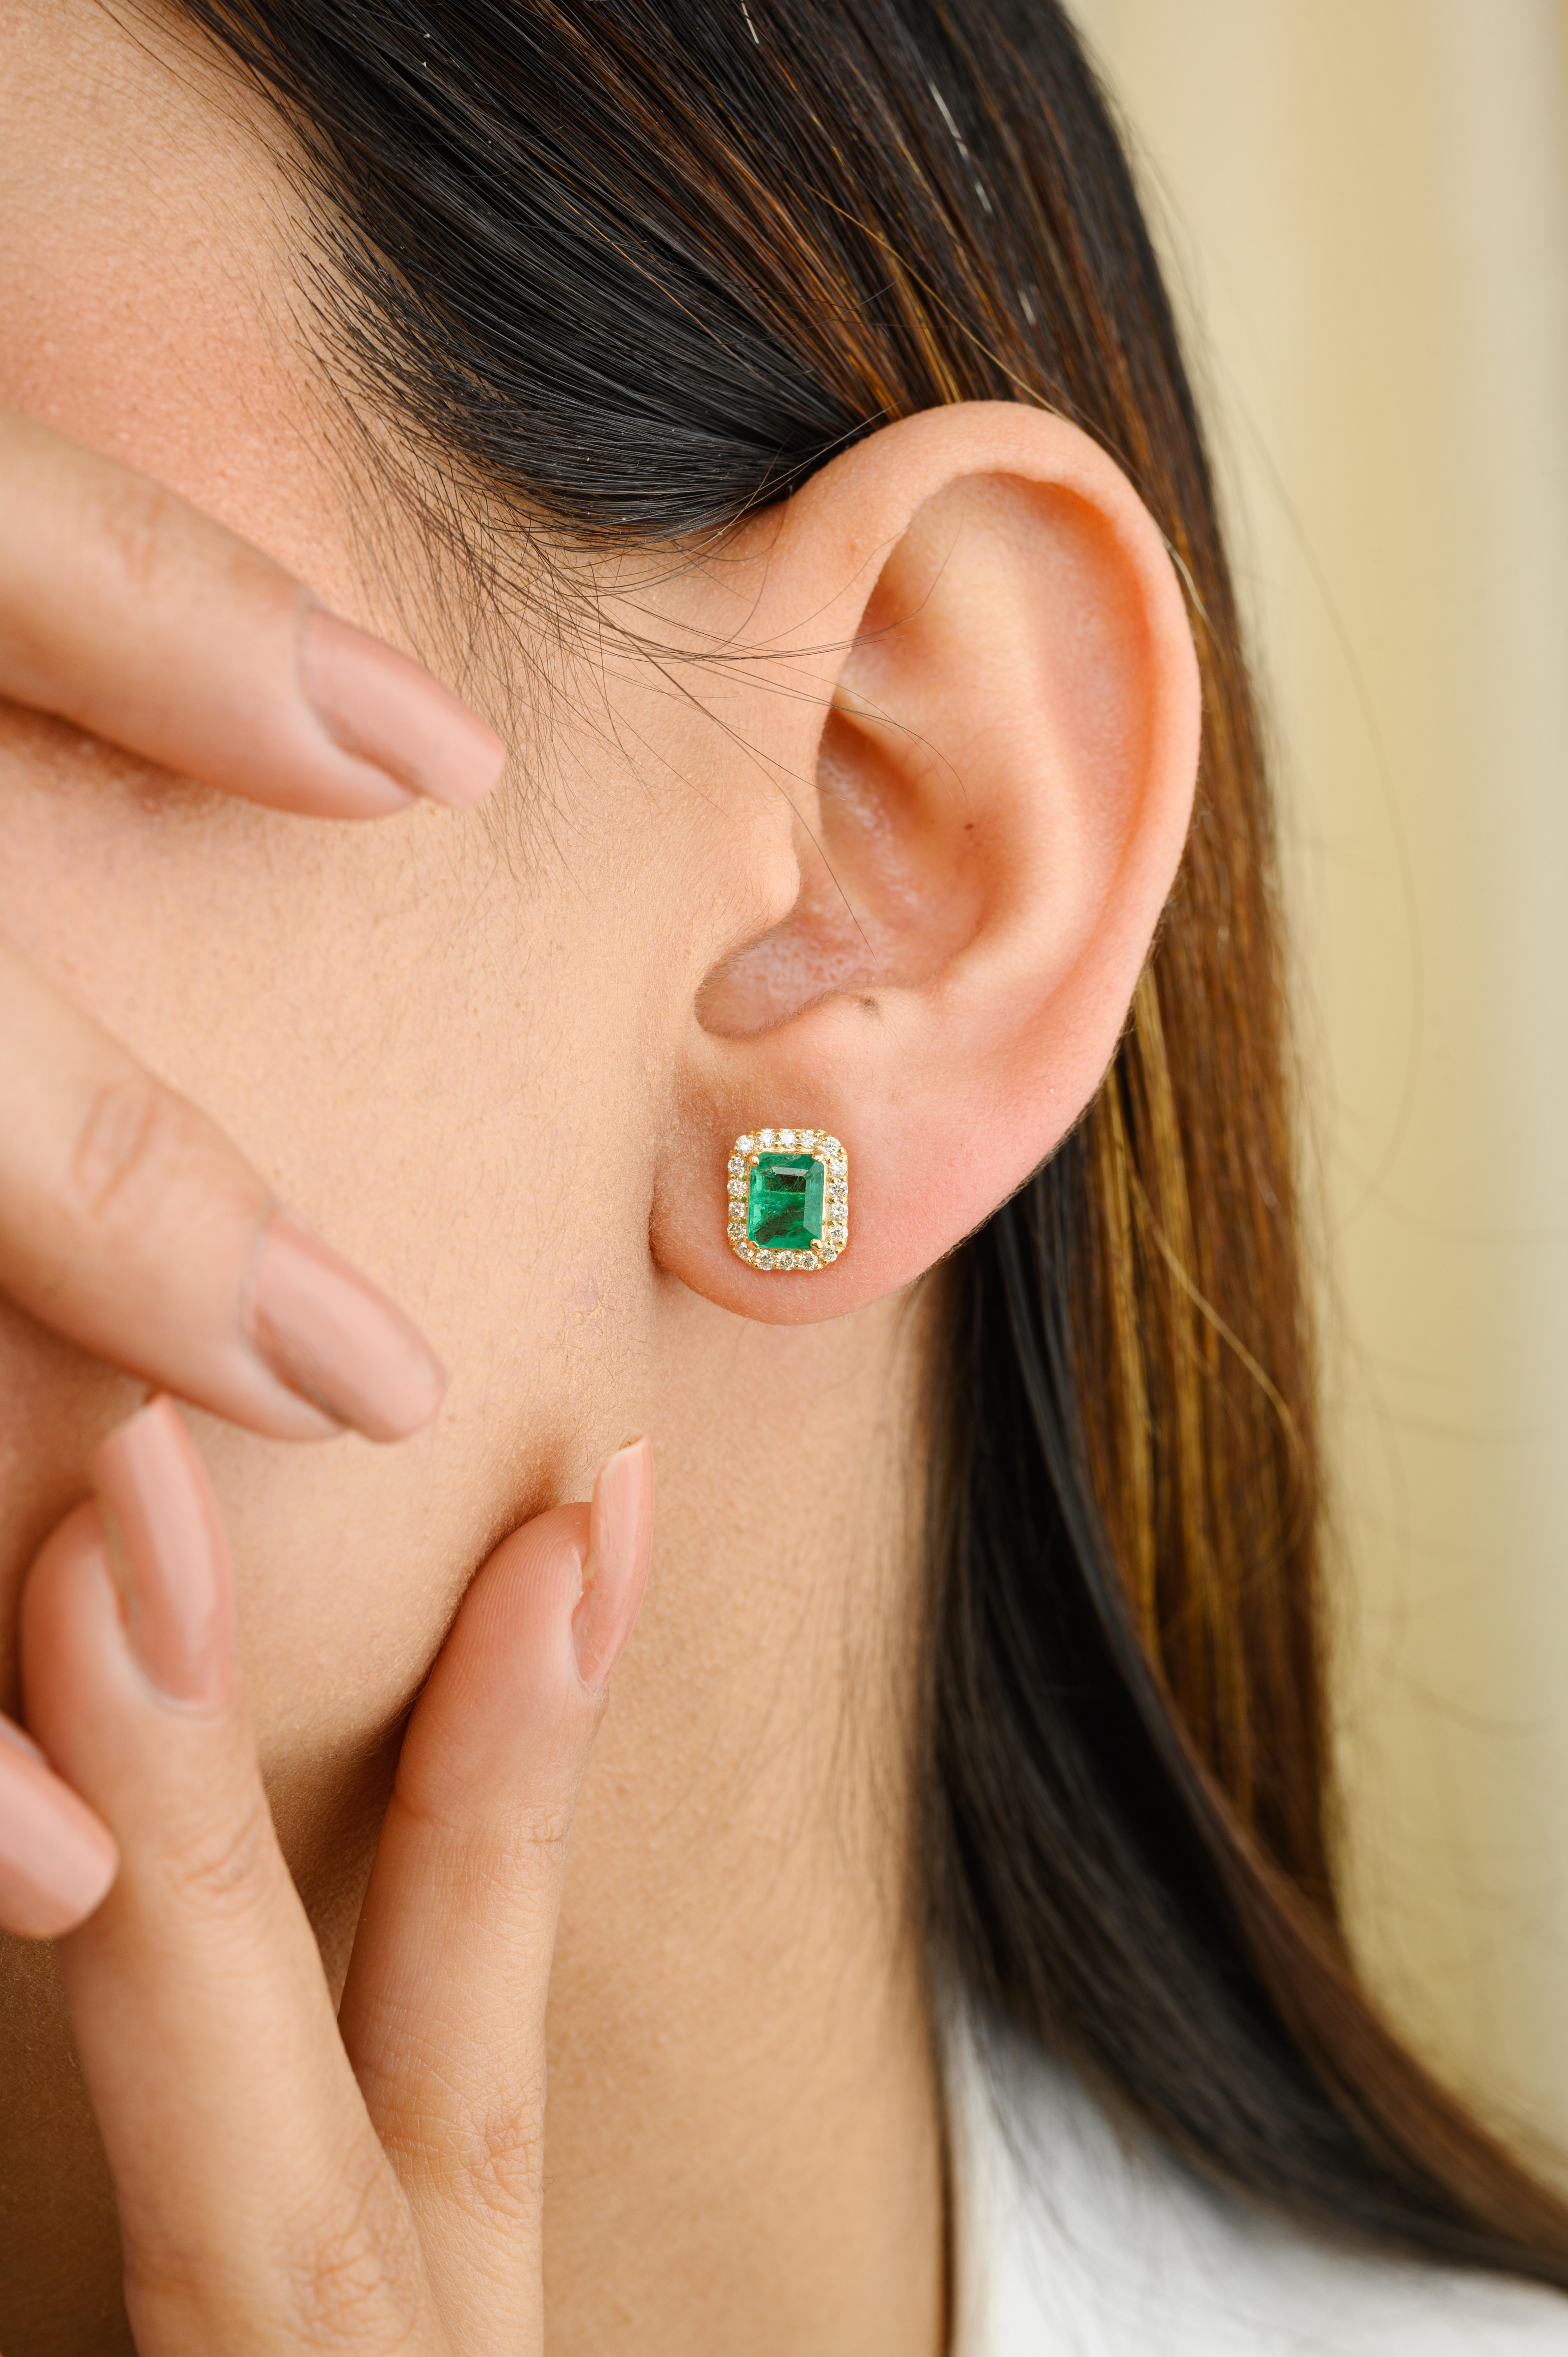 Green Emerald Diamond Halo Stud Earrings in 18K Gold to make a statement with your look. You shall need studs earrings to make a statement with your look. These earrings create a sparkling, luxurious look featuring octagon cut emerald and round cut